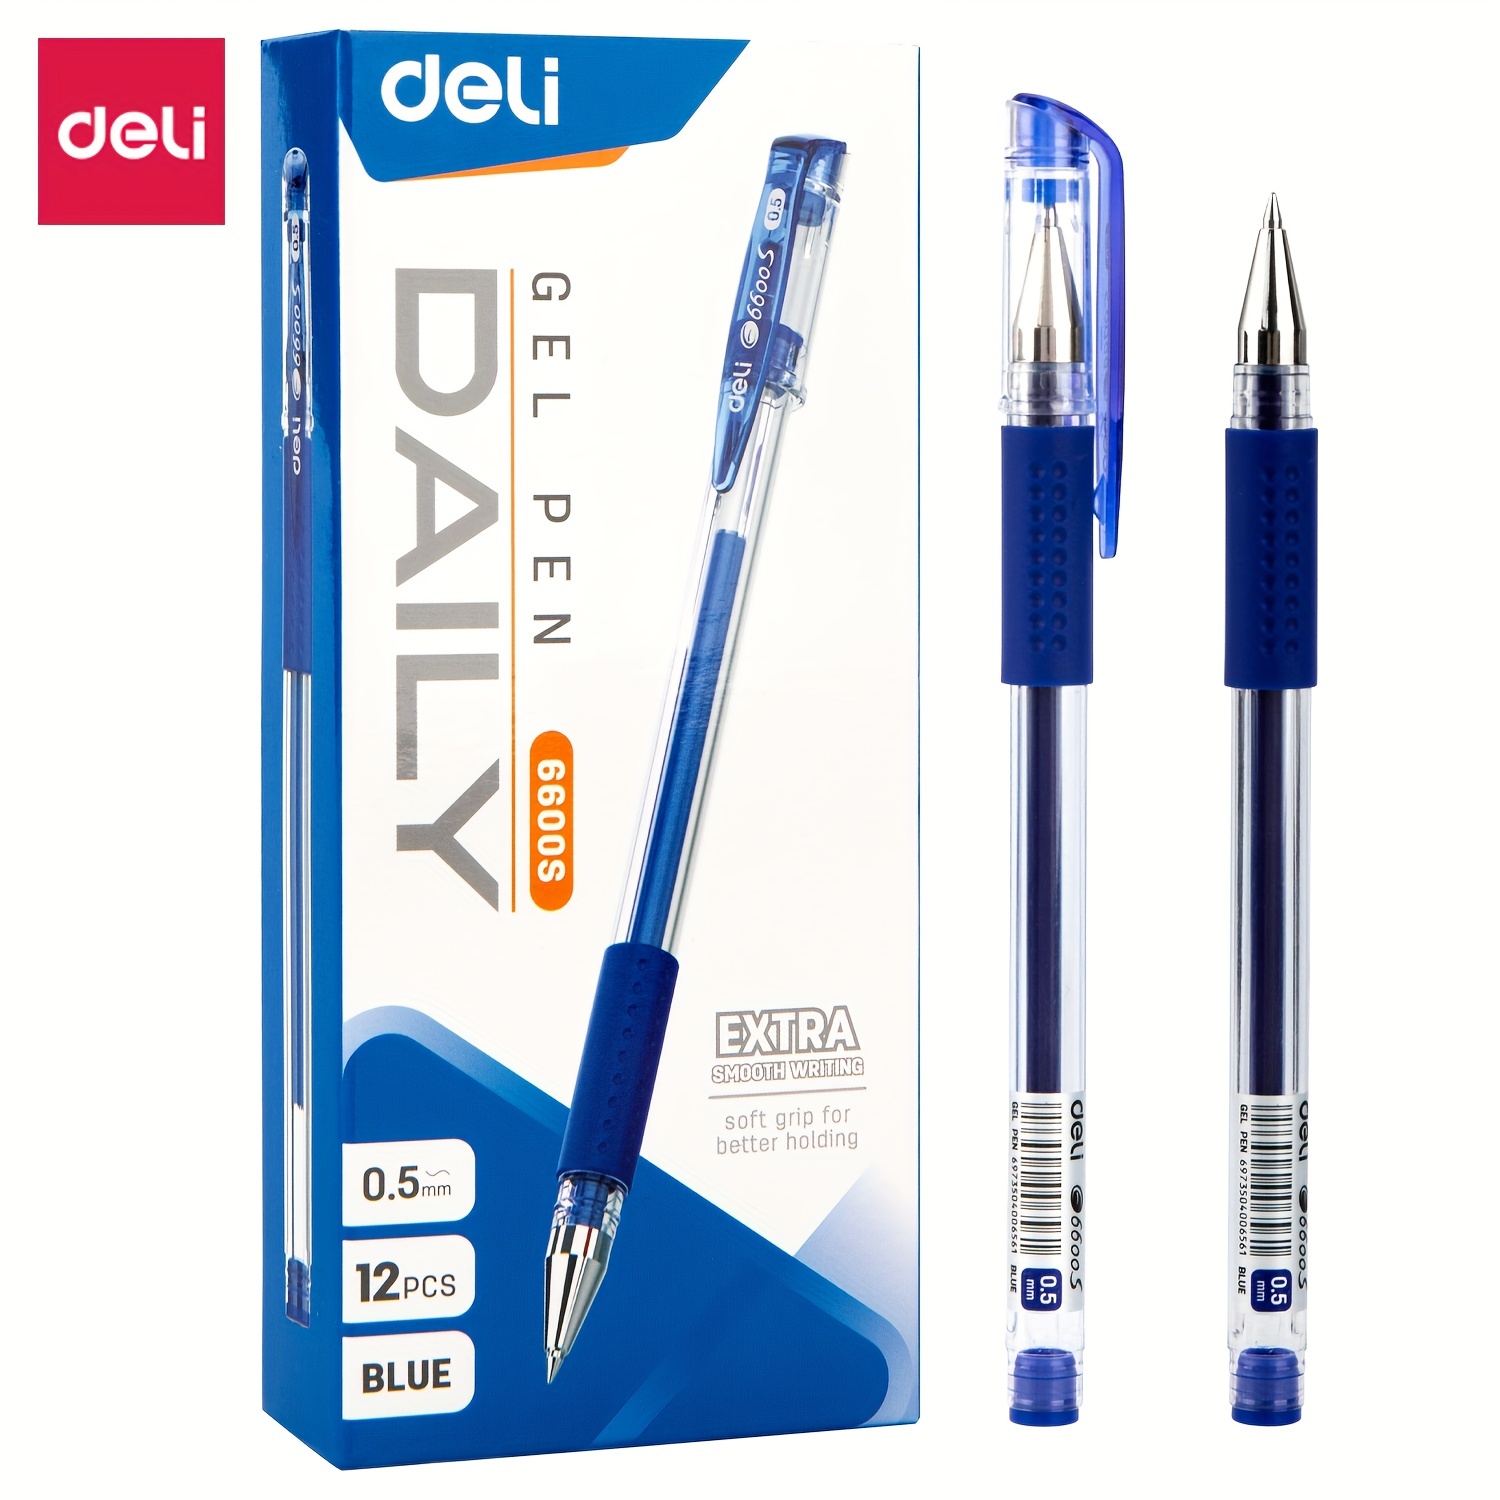 JVPEN Ballpoint Pen Office Supplies - Consistent Smooth Writing, Jet-line Series, No Smudge, Smooth Writing Pens, for Teacher, Study, Work Place